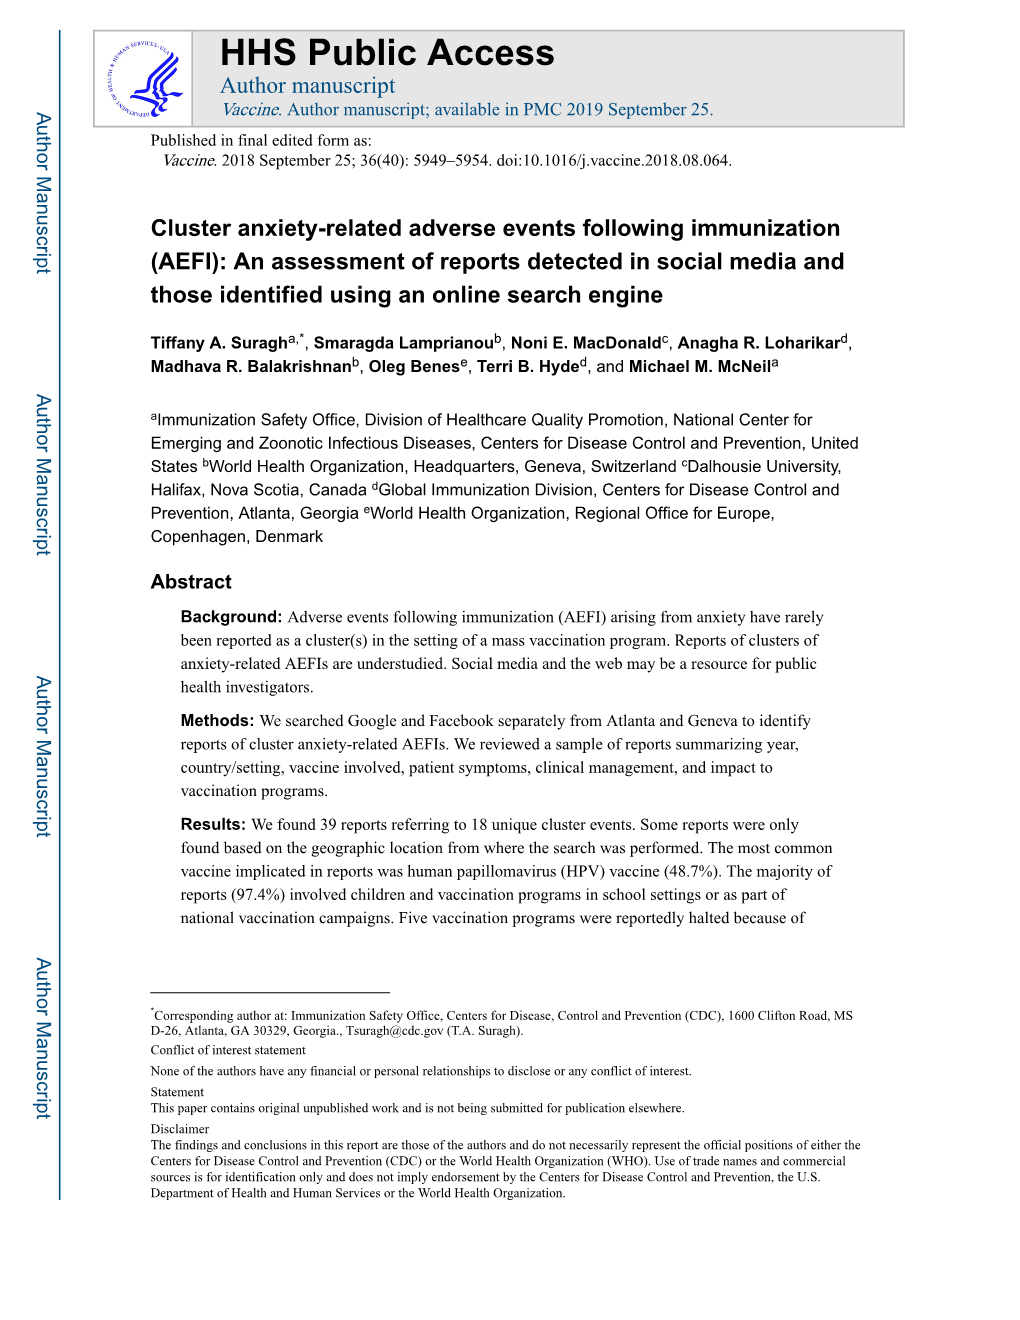 Cluster Anxiety-Related Adverse Events Following Immunization (AEFI)